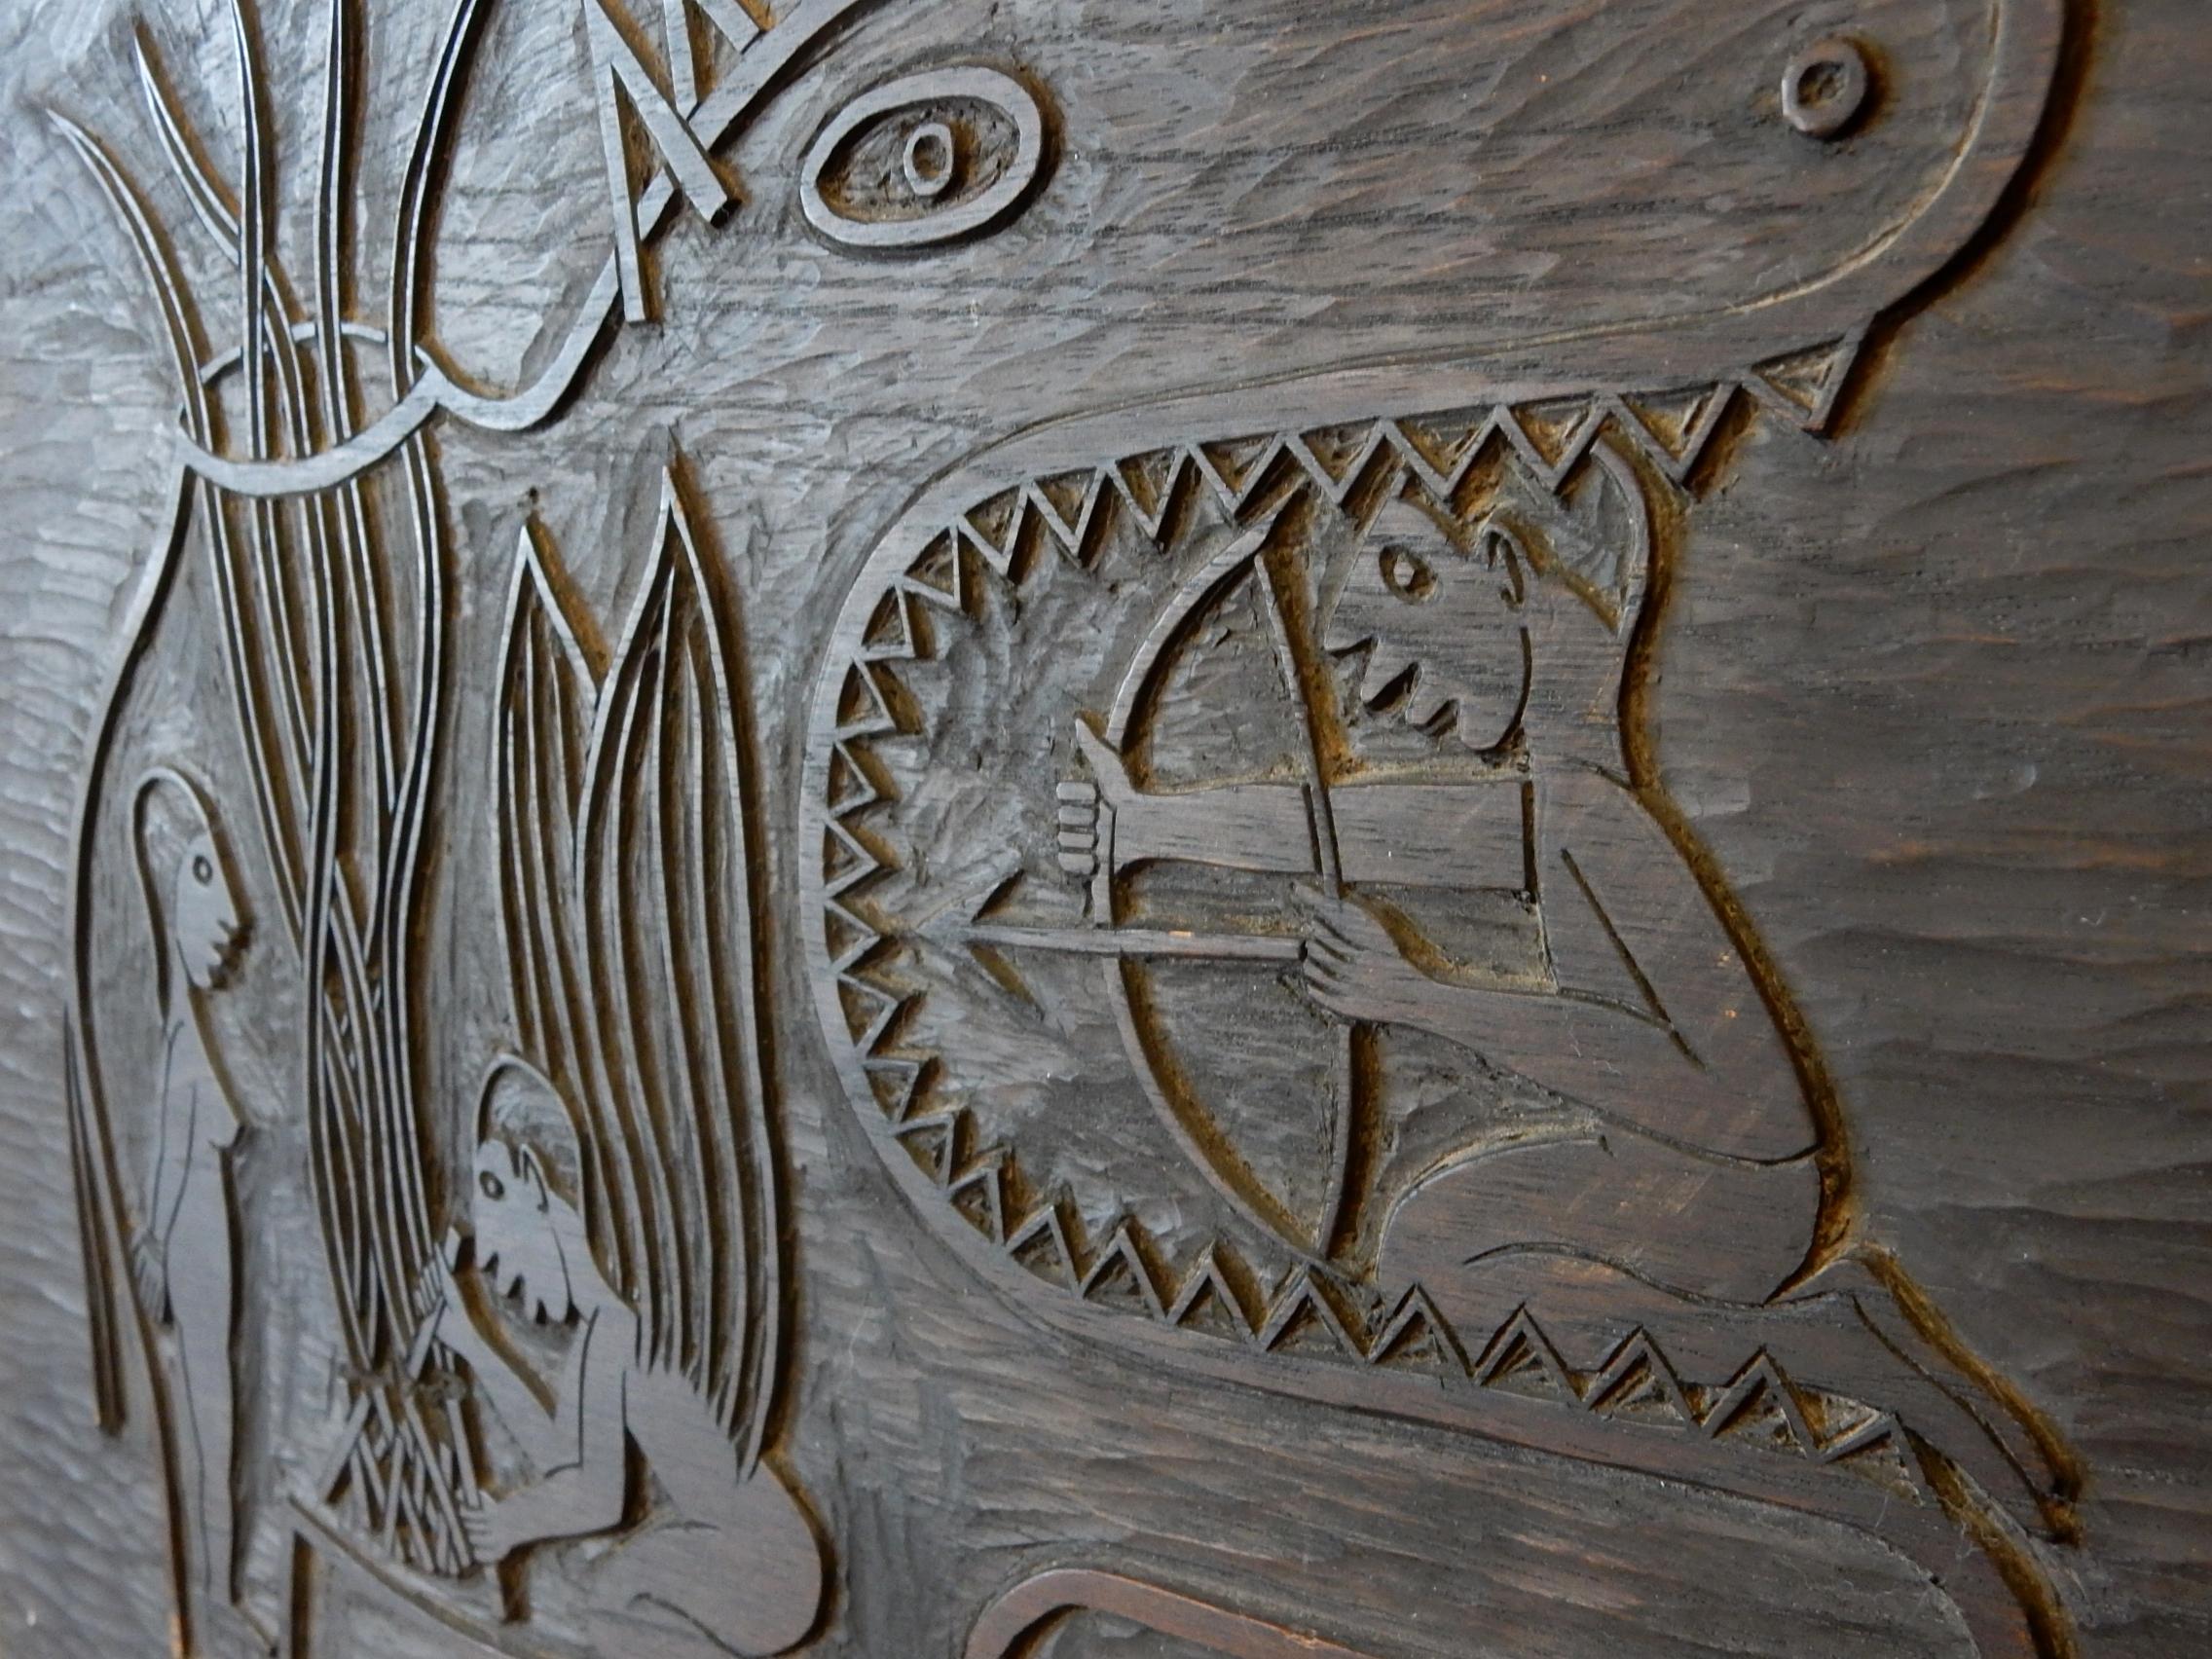 Chip carved sculpture on a hardwood board. This is an early example of art by Edwin Scheier
from his teaching years at the University of Delaware, circa 1940s.
This was to be a repetitious scene throughout much of his drawings and paintings.
It's